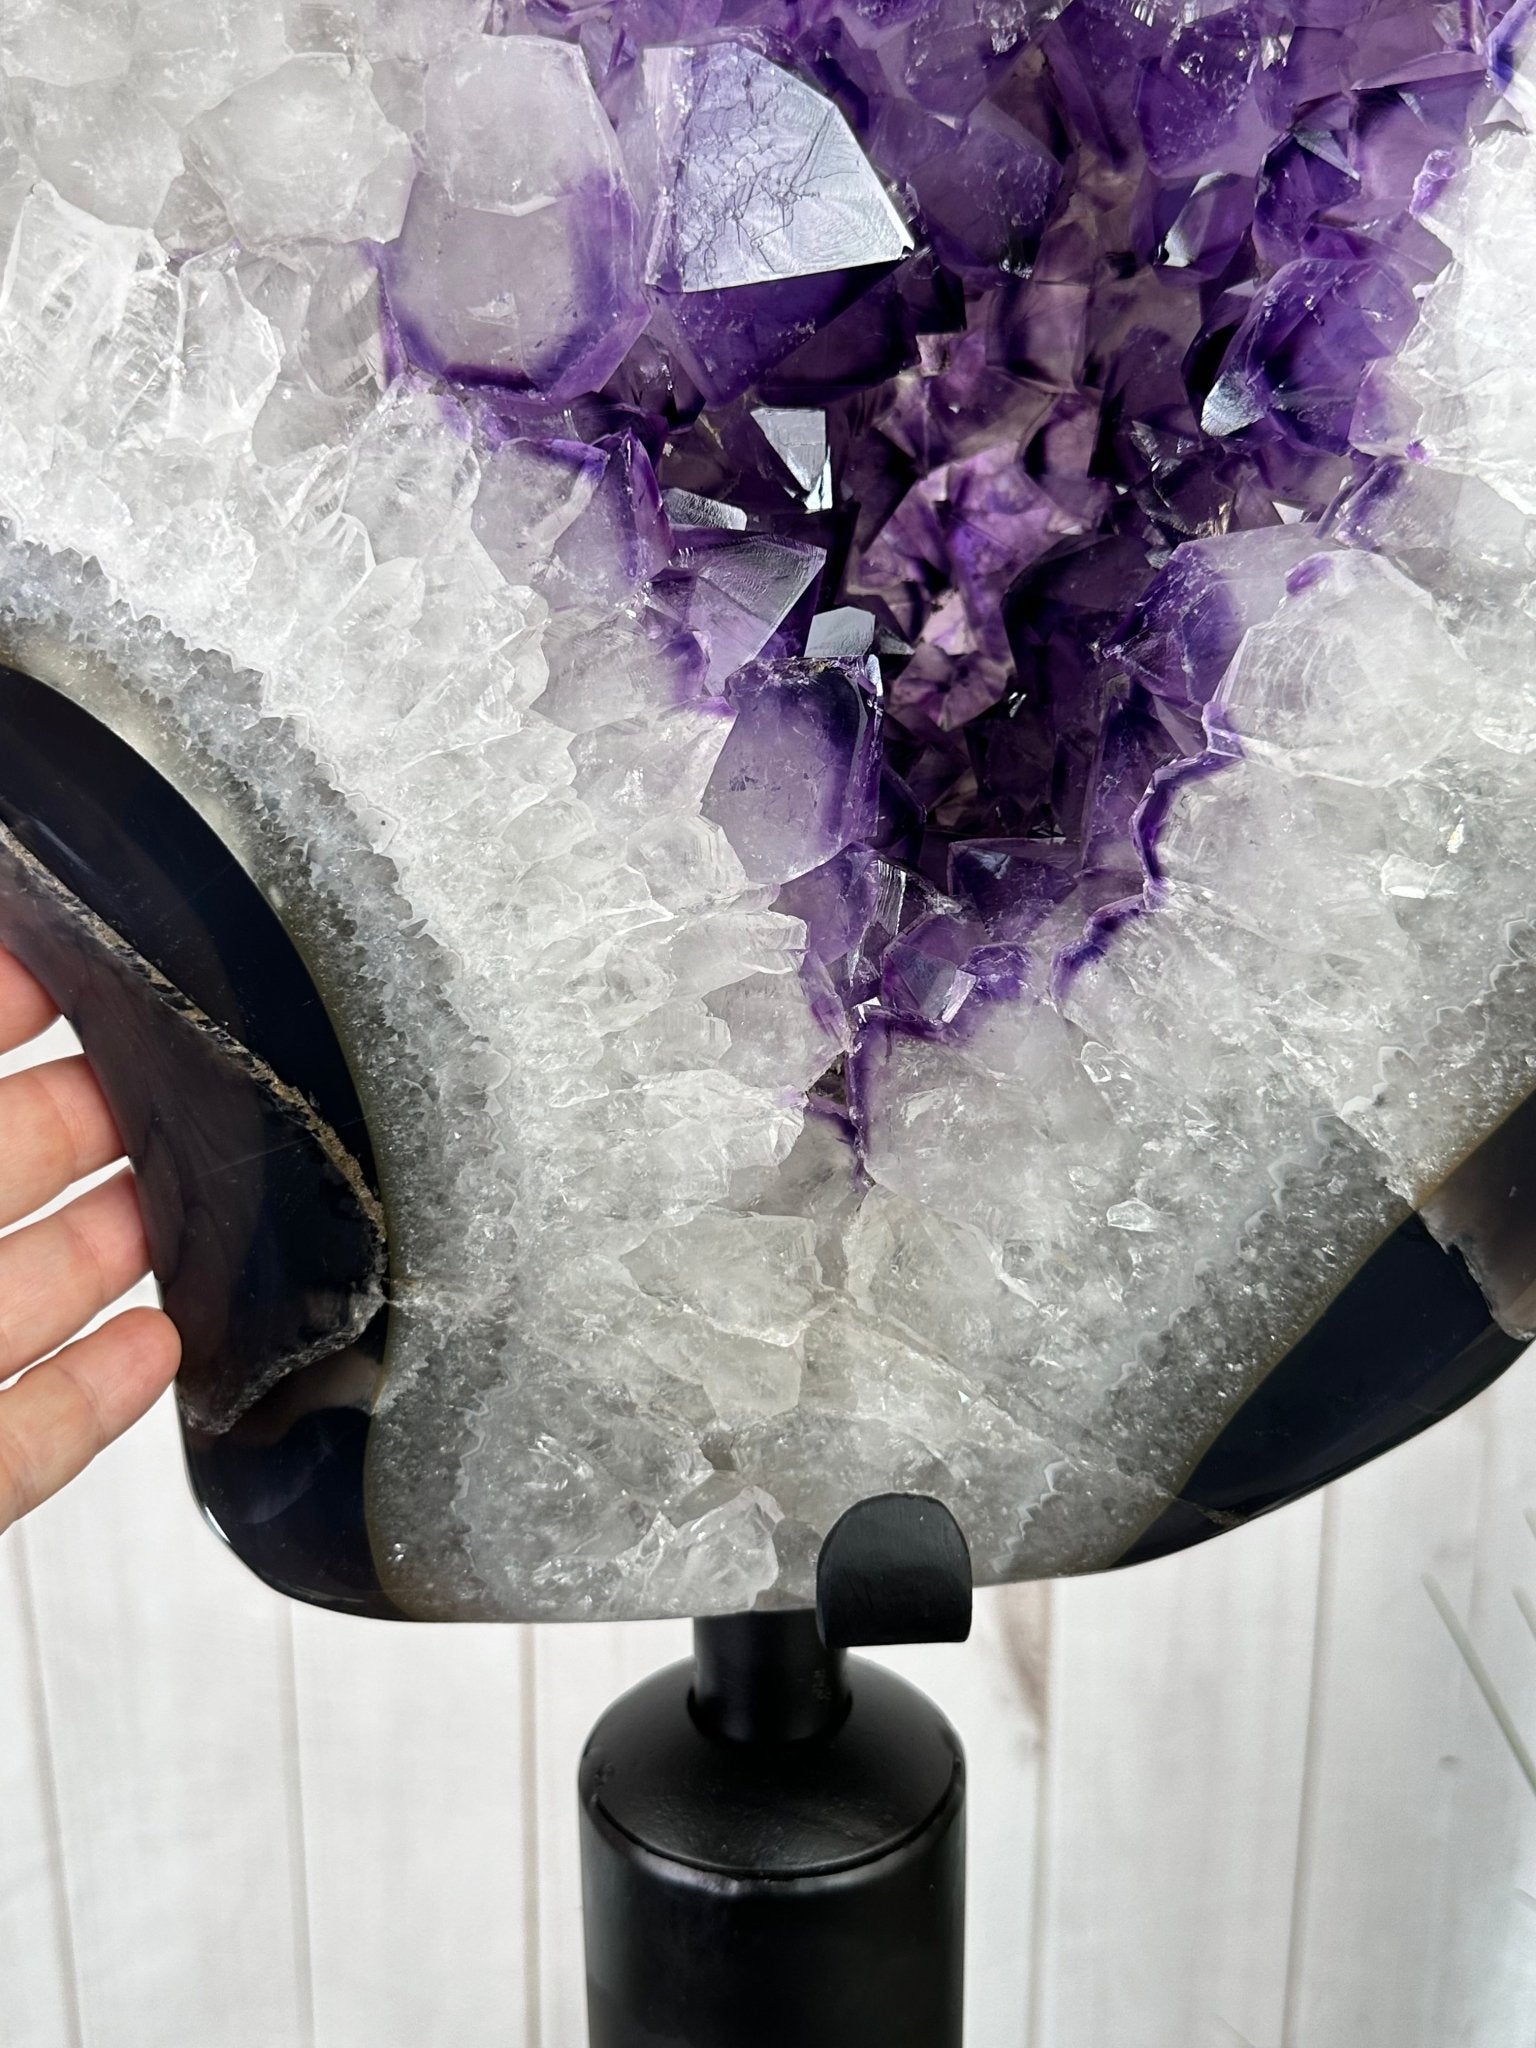 Super Quality Amethyst Slice on Rotating Stand, 194 lbs & 67" Tall #5622AM-002 - Brazil GemsBrazil GemsSuper Quality Amethyst Slice on Rotating Stand, 194 lbs & 67" Tall #5622AM-002Slices on Rotating Bases5622AM-002